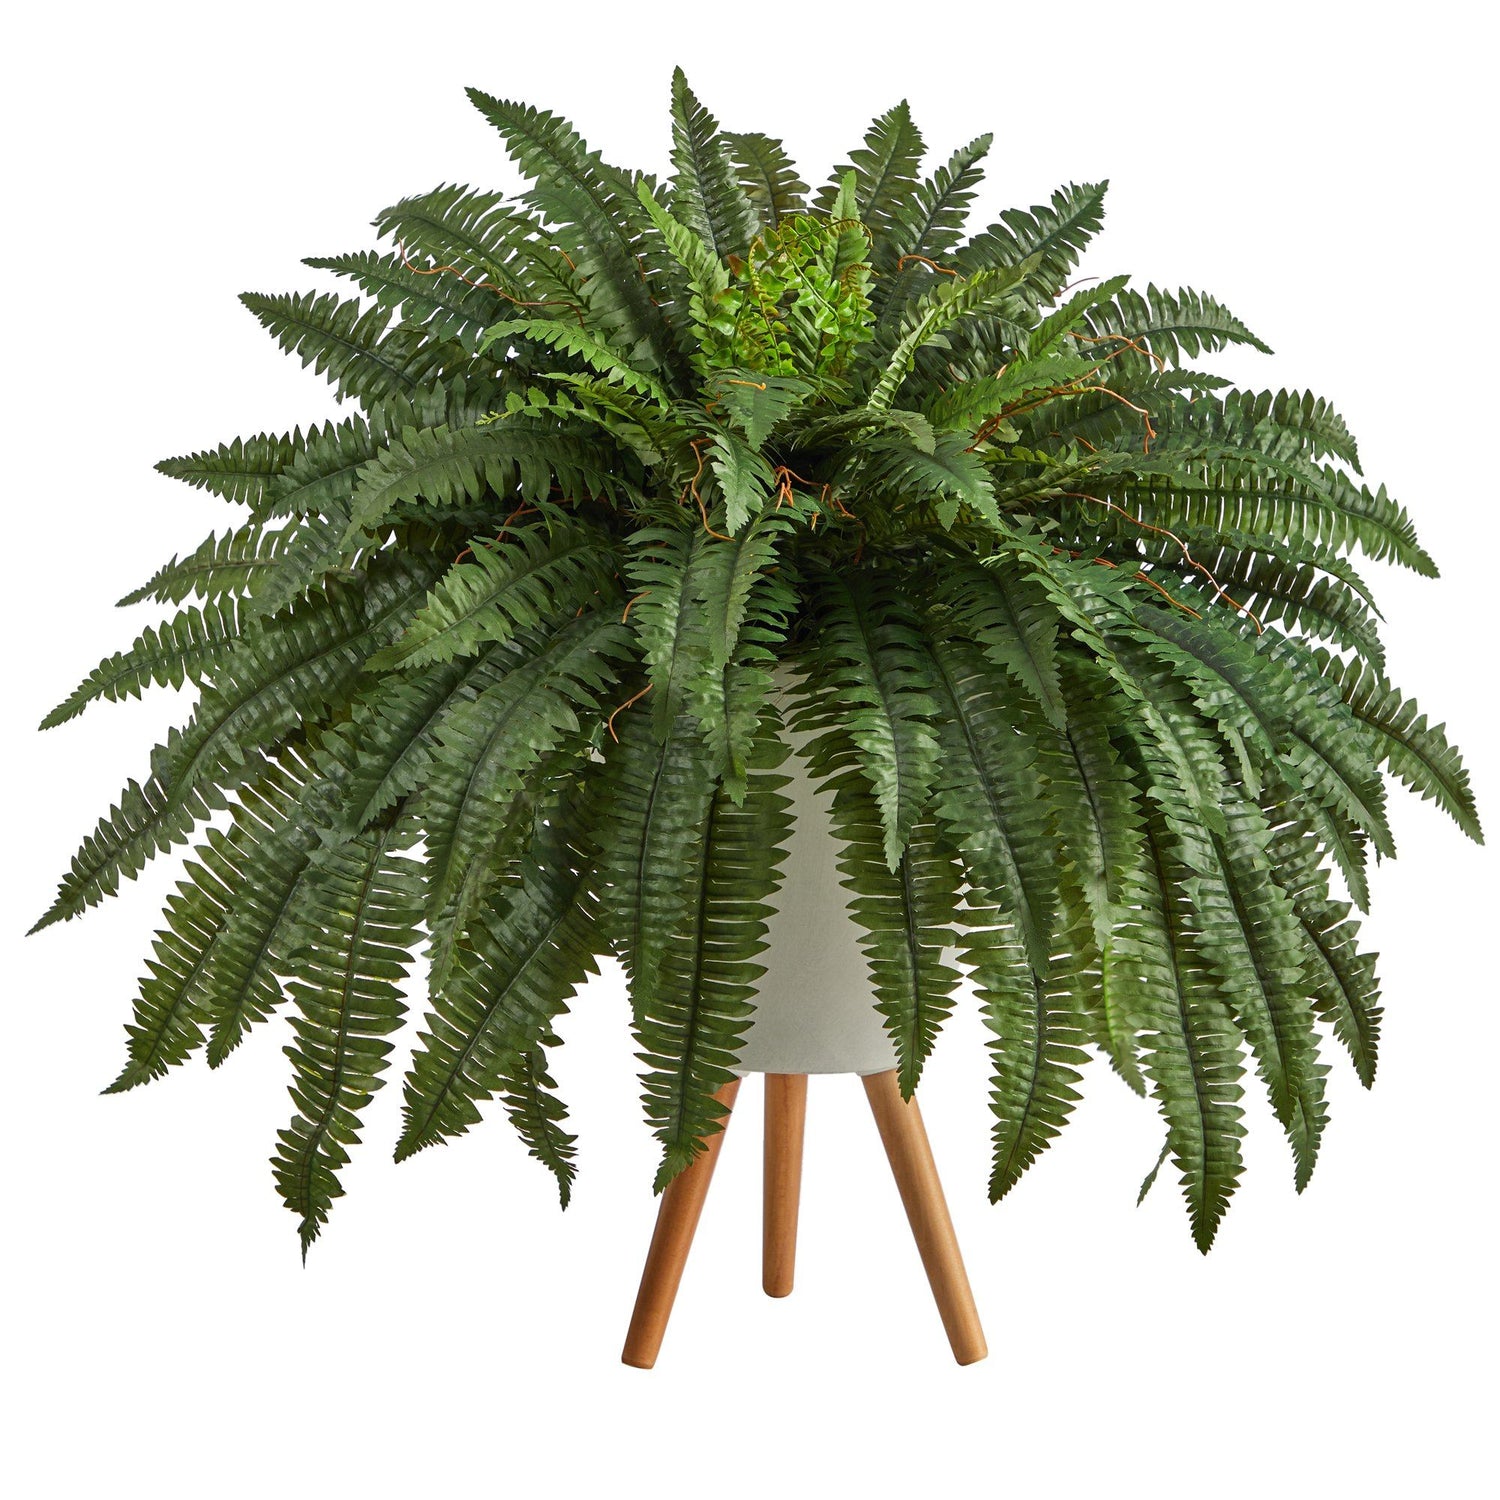 2.5’ Boston Fern Artificial Plant in White Planter with Legs